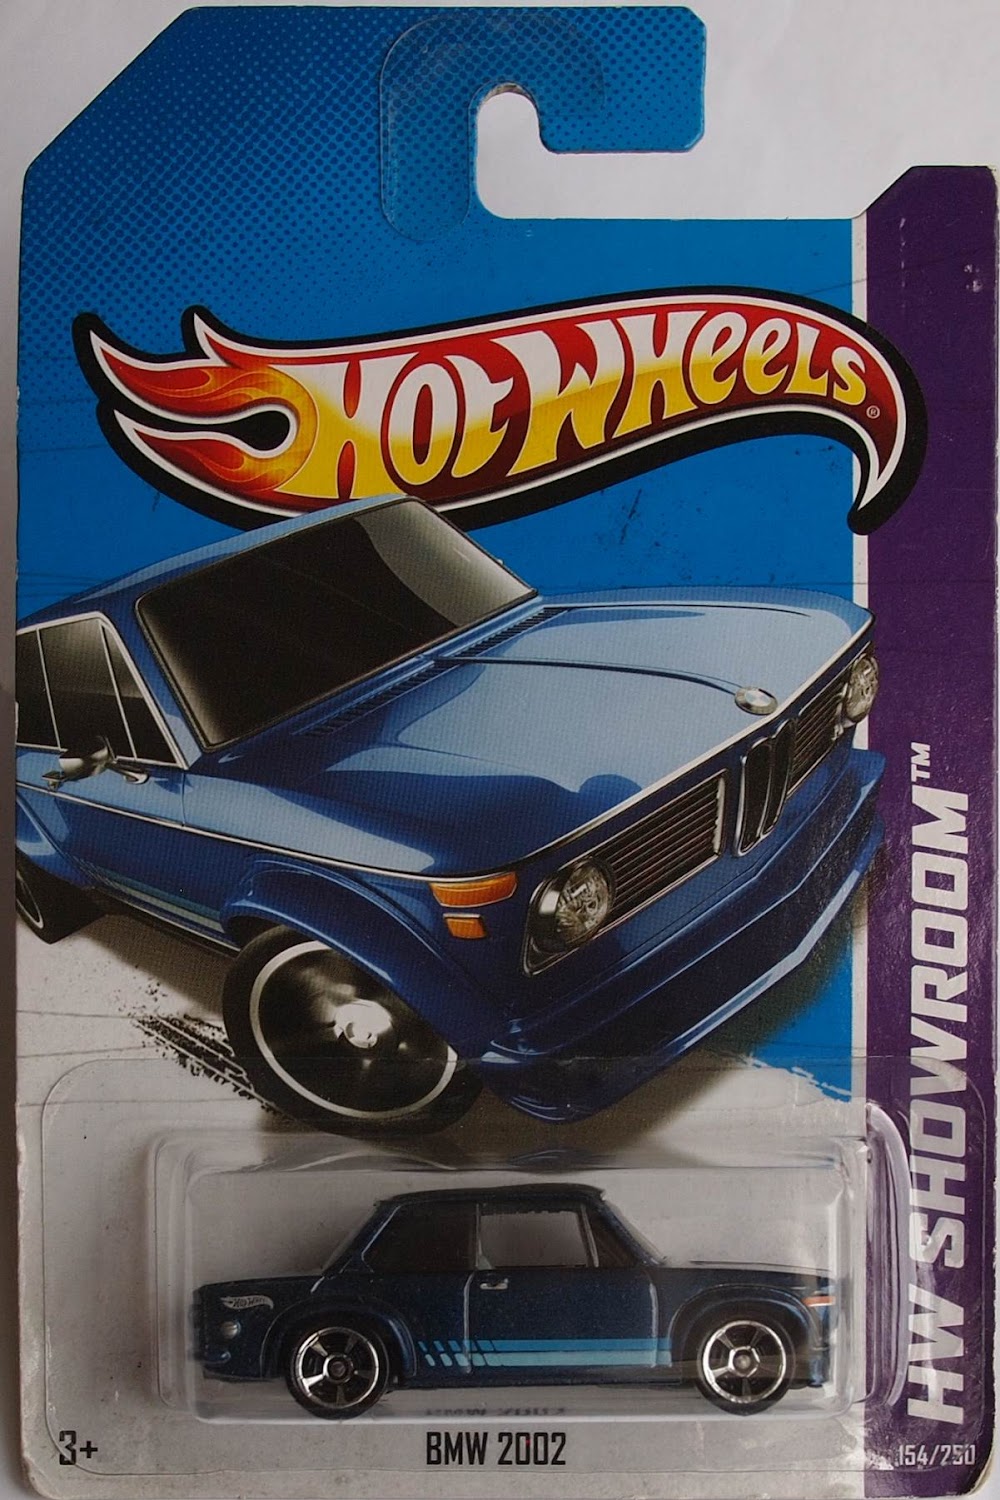 BMW 2002 cover